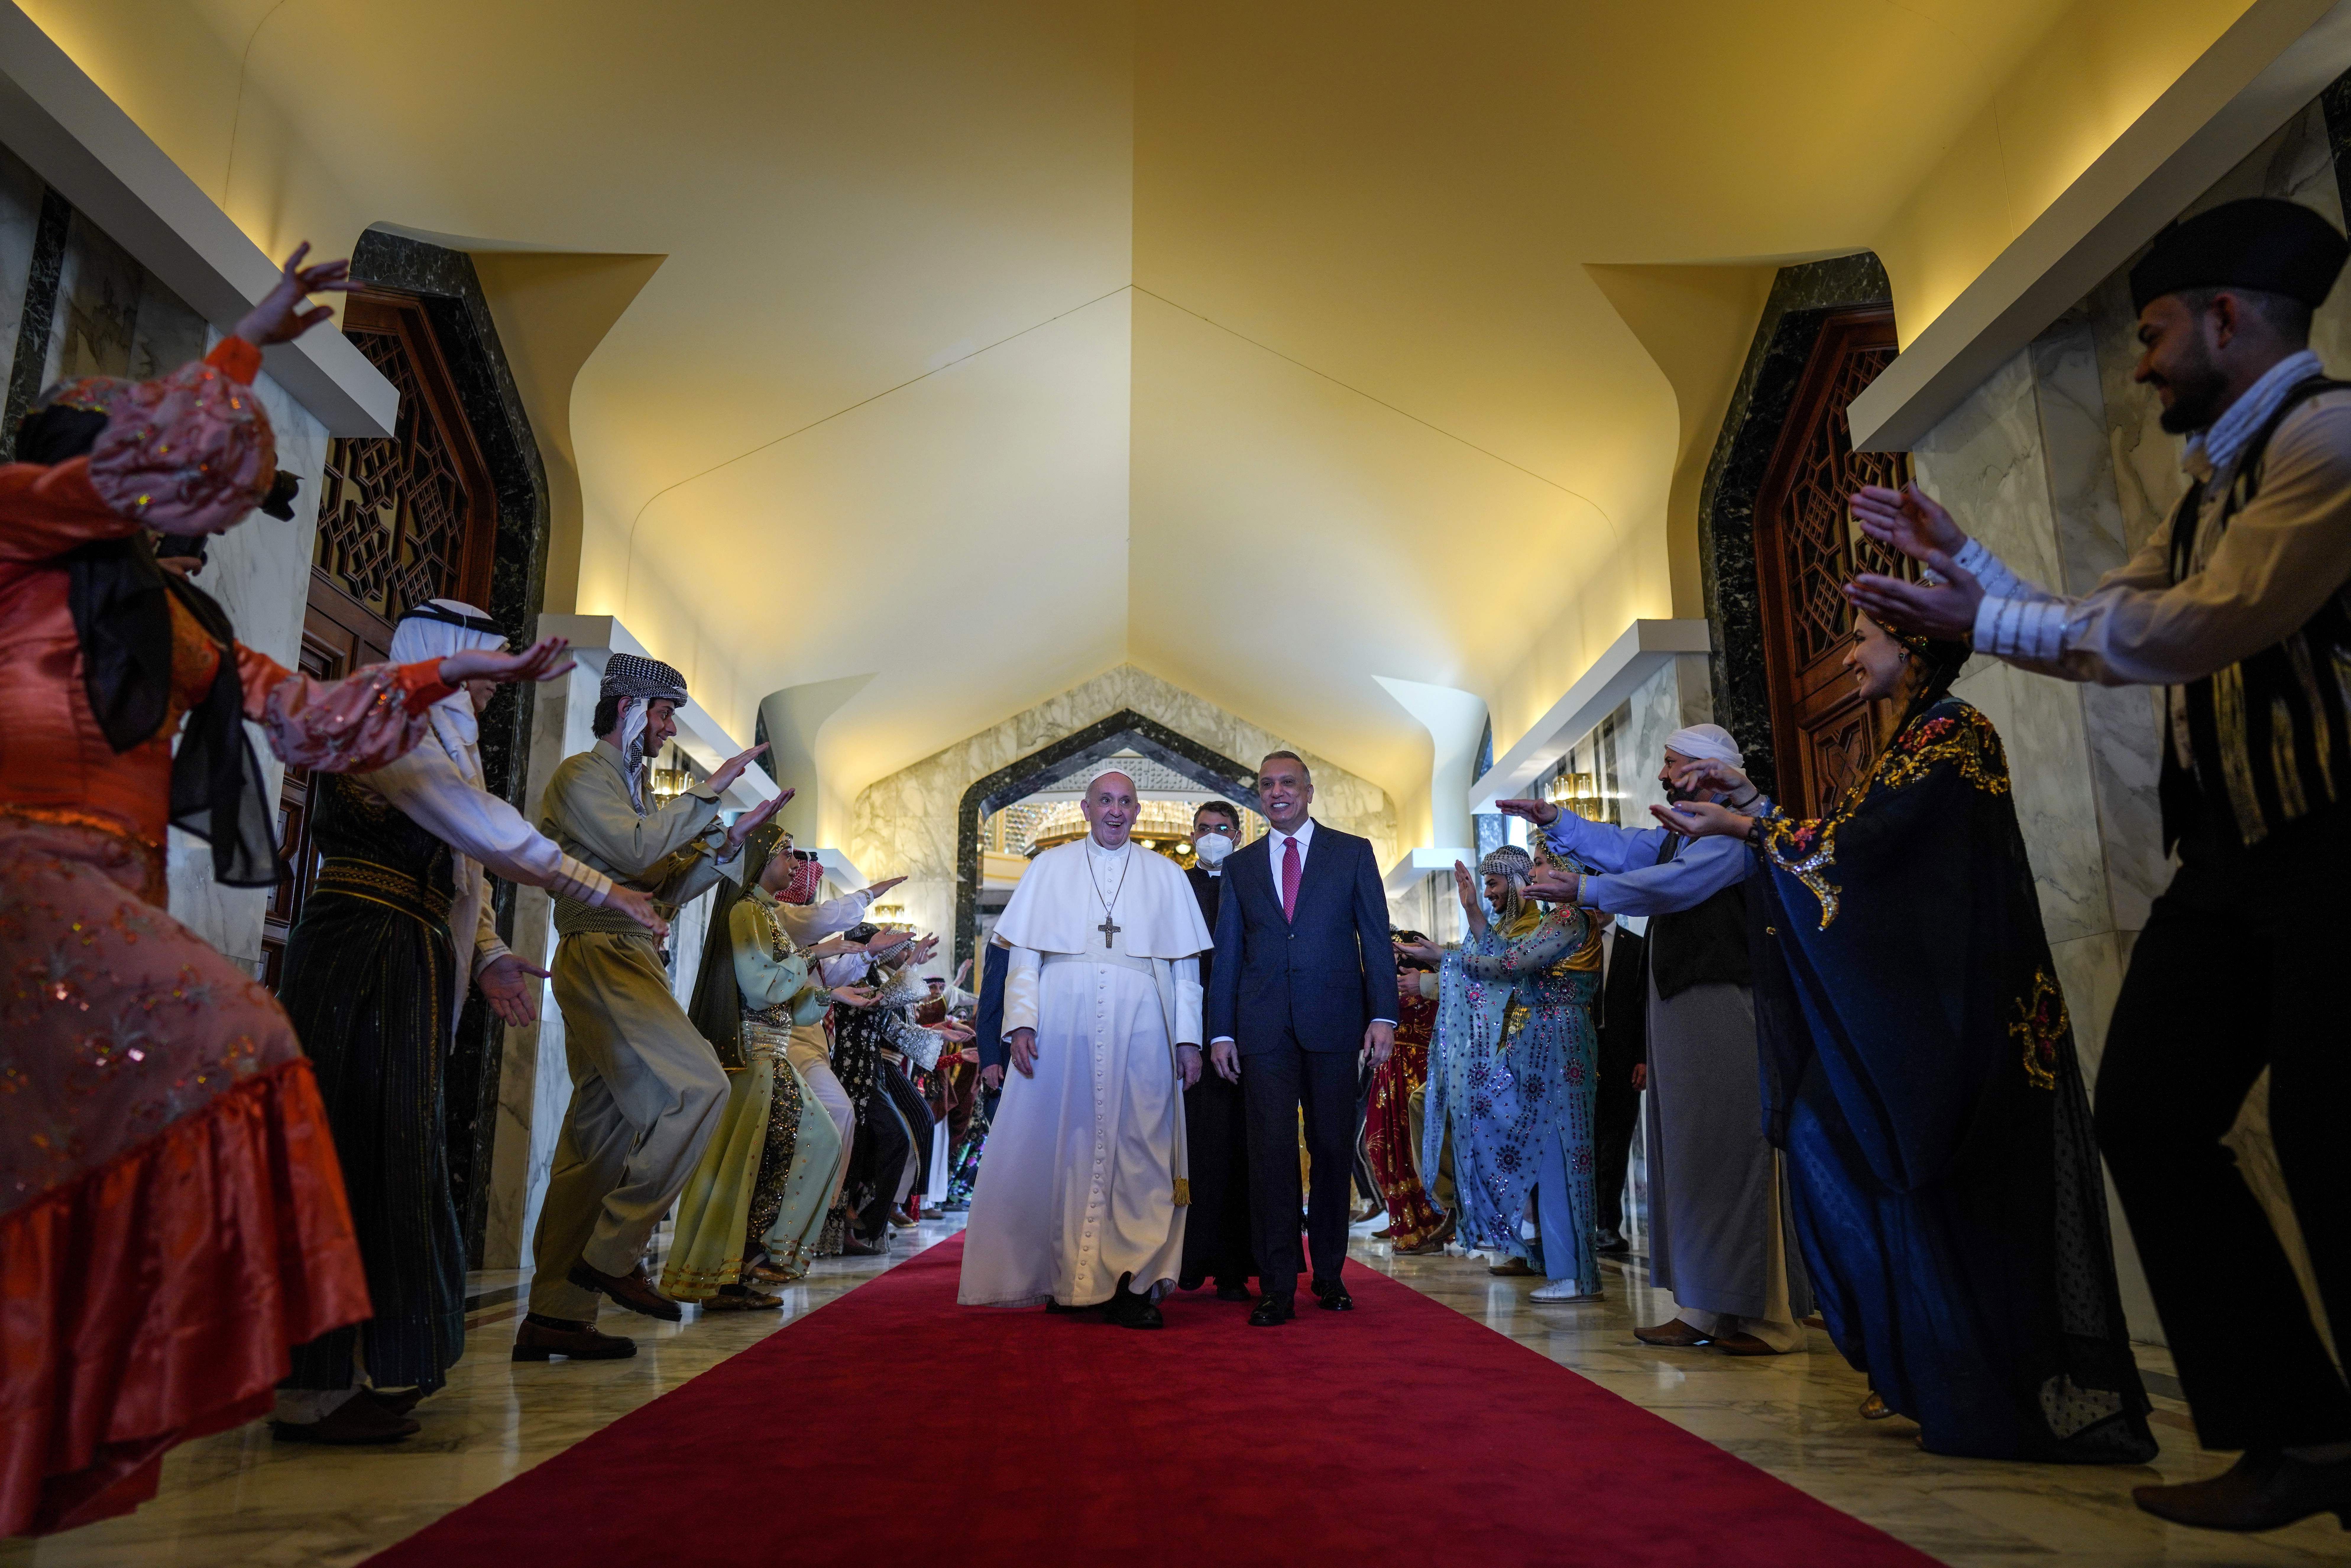 Photo of Pope Francis walking next to Iraq's Prime Minister Mustafa al-Kadhemi in a hallways surrounded by performers.